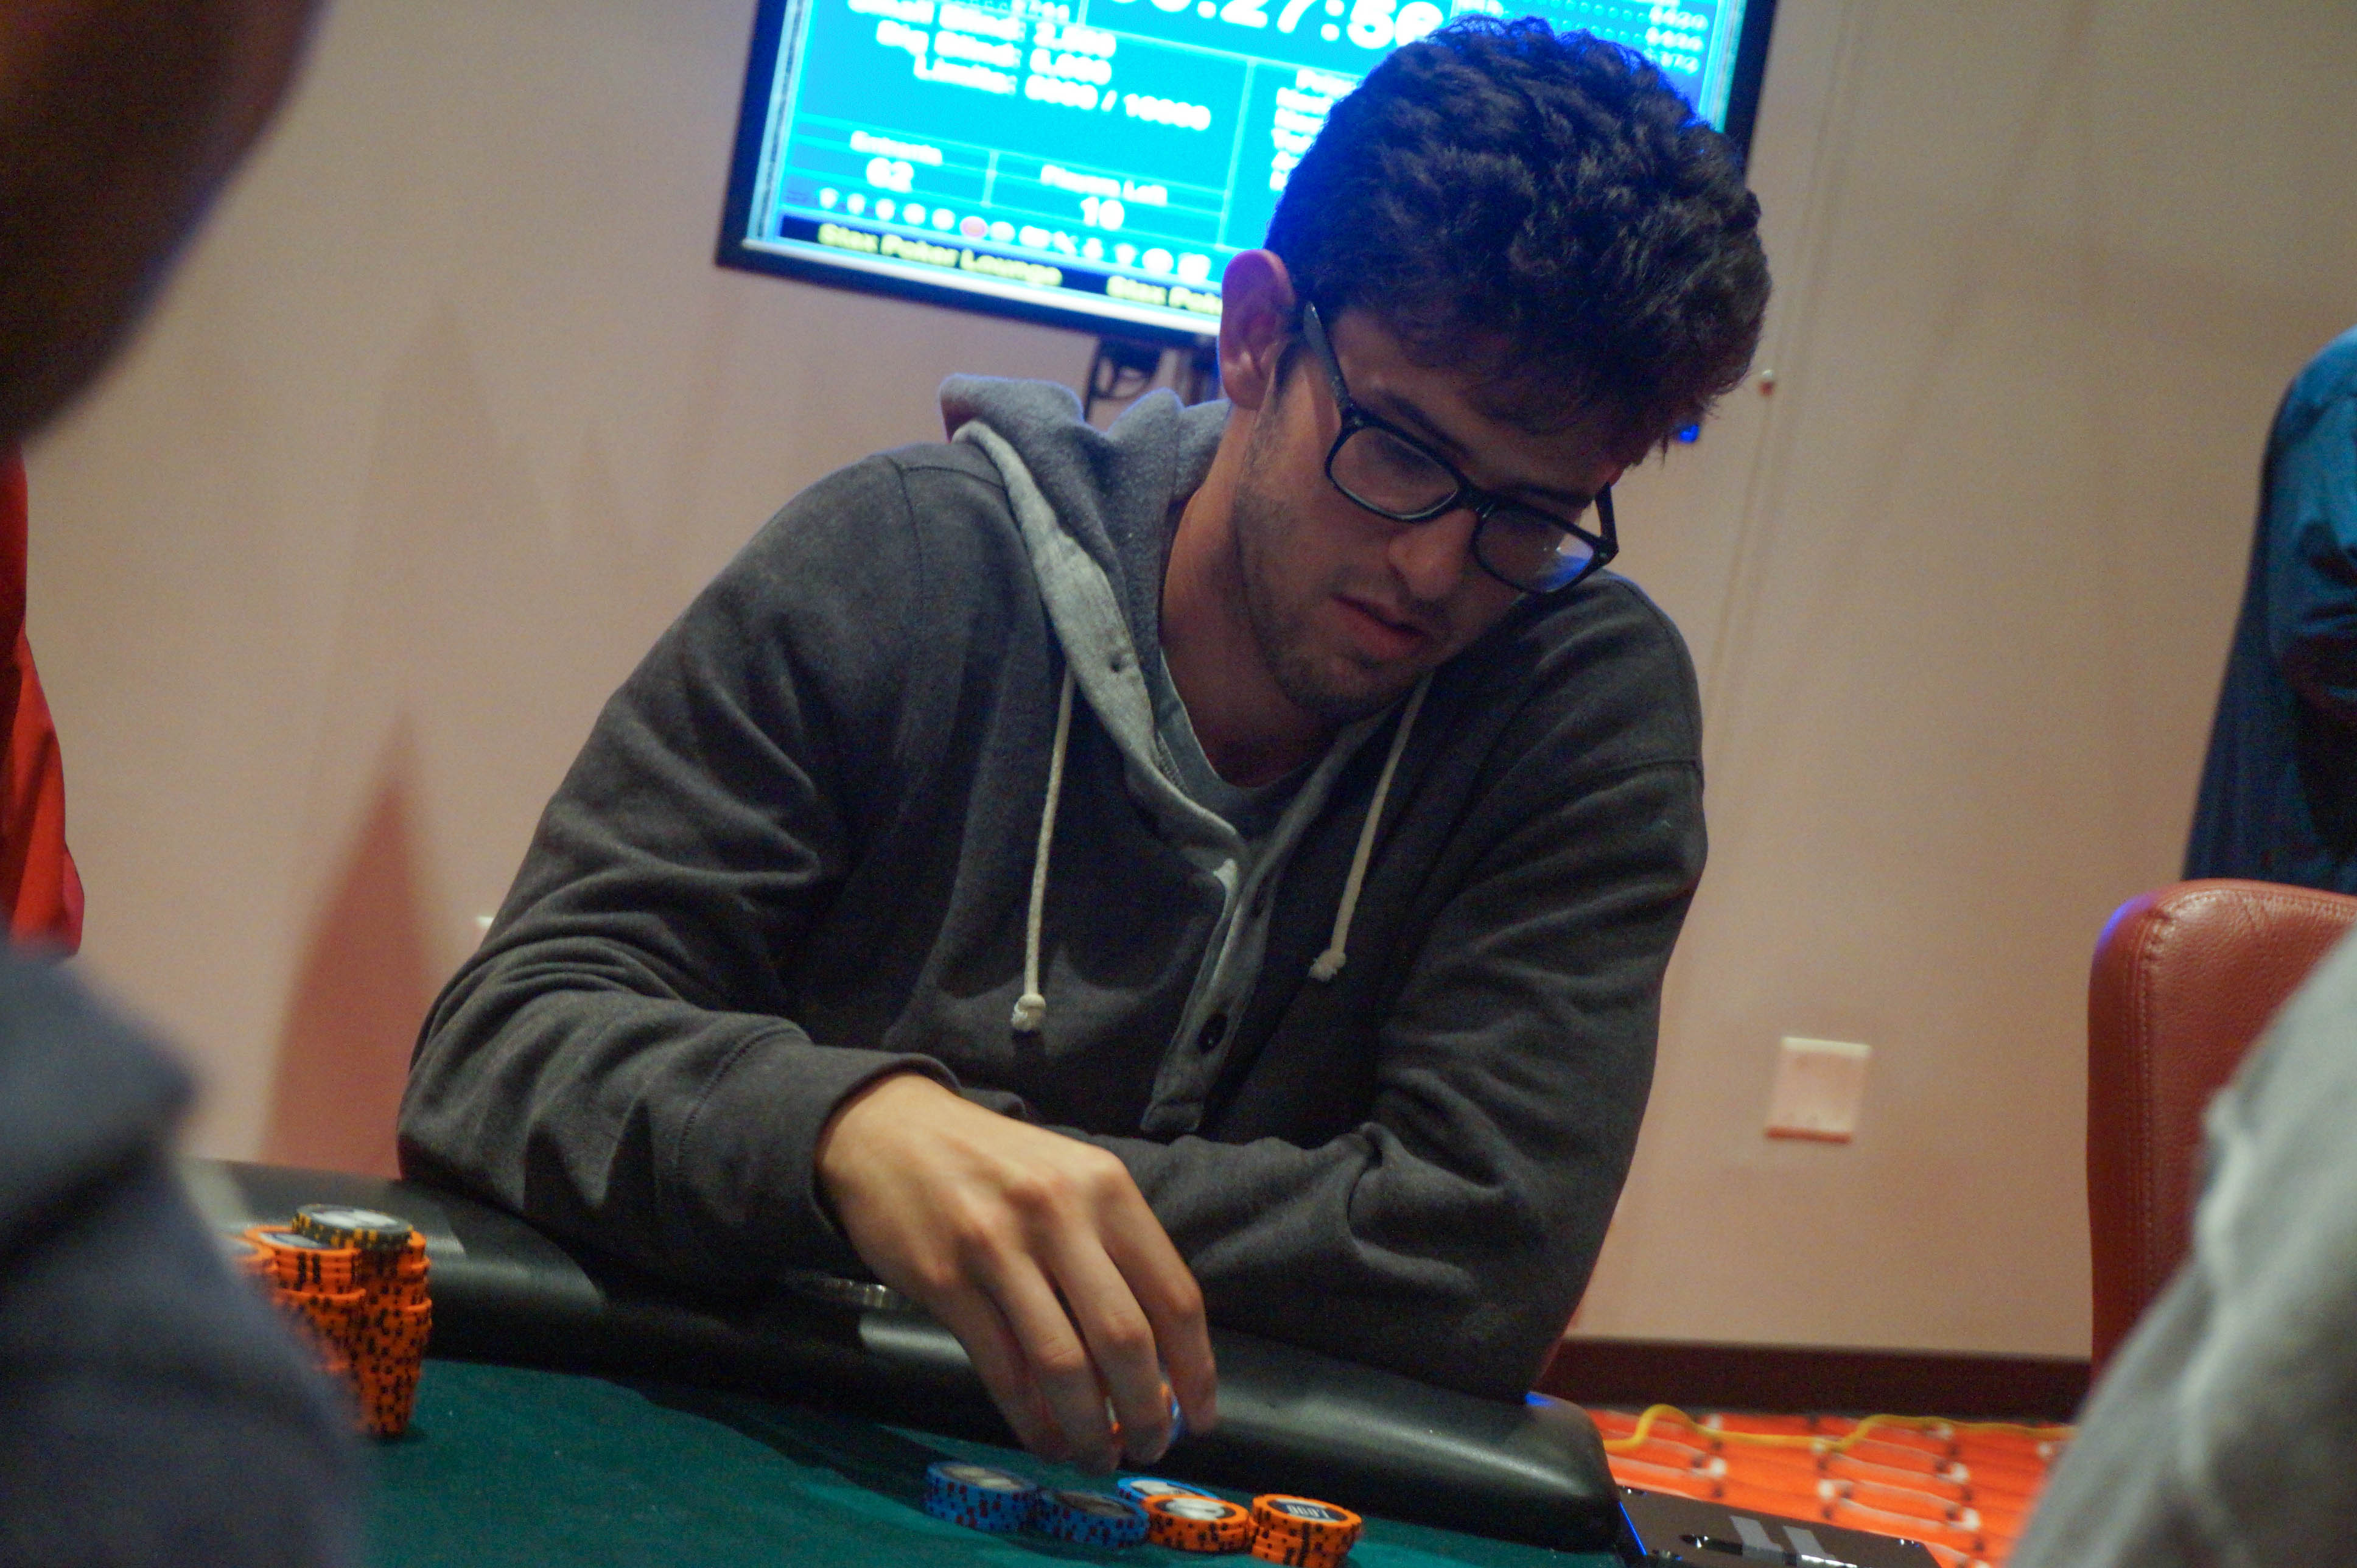 Aaron Kupin - Eliminated in 6th place ($744)